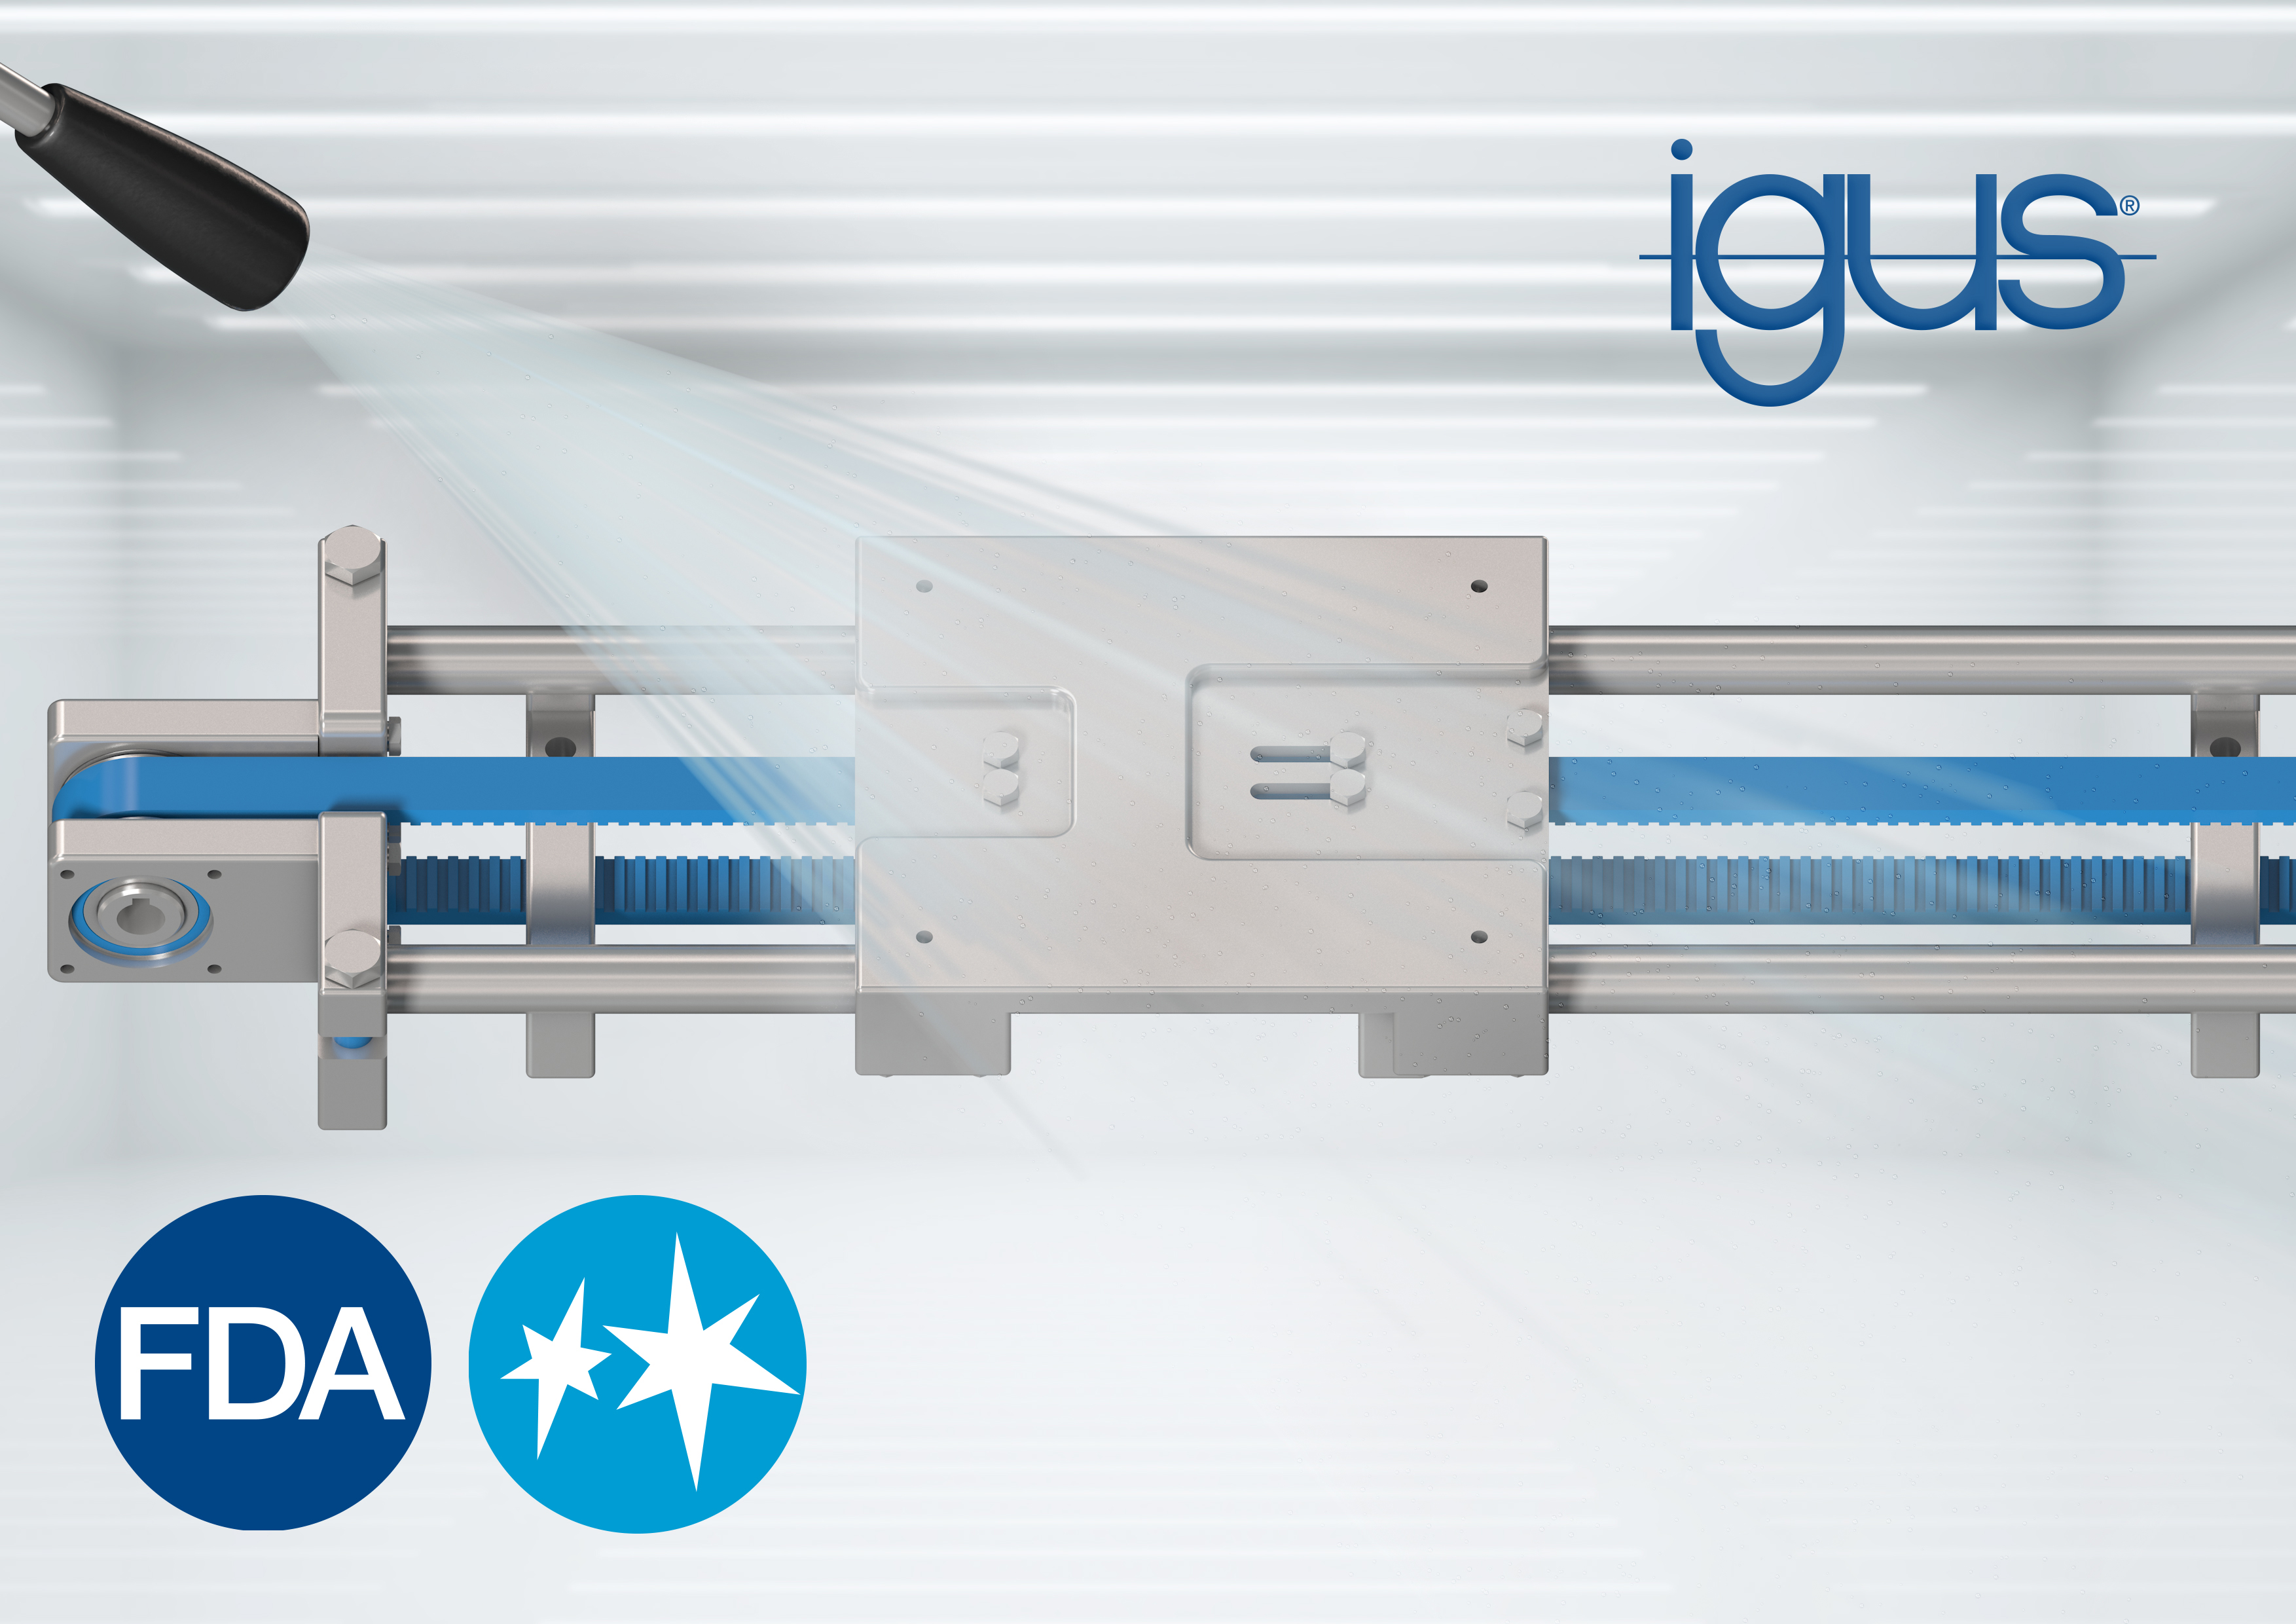 Lubrication-free igus linear belt axis in a hygienic design for clean use in food technology